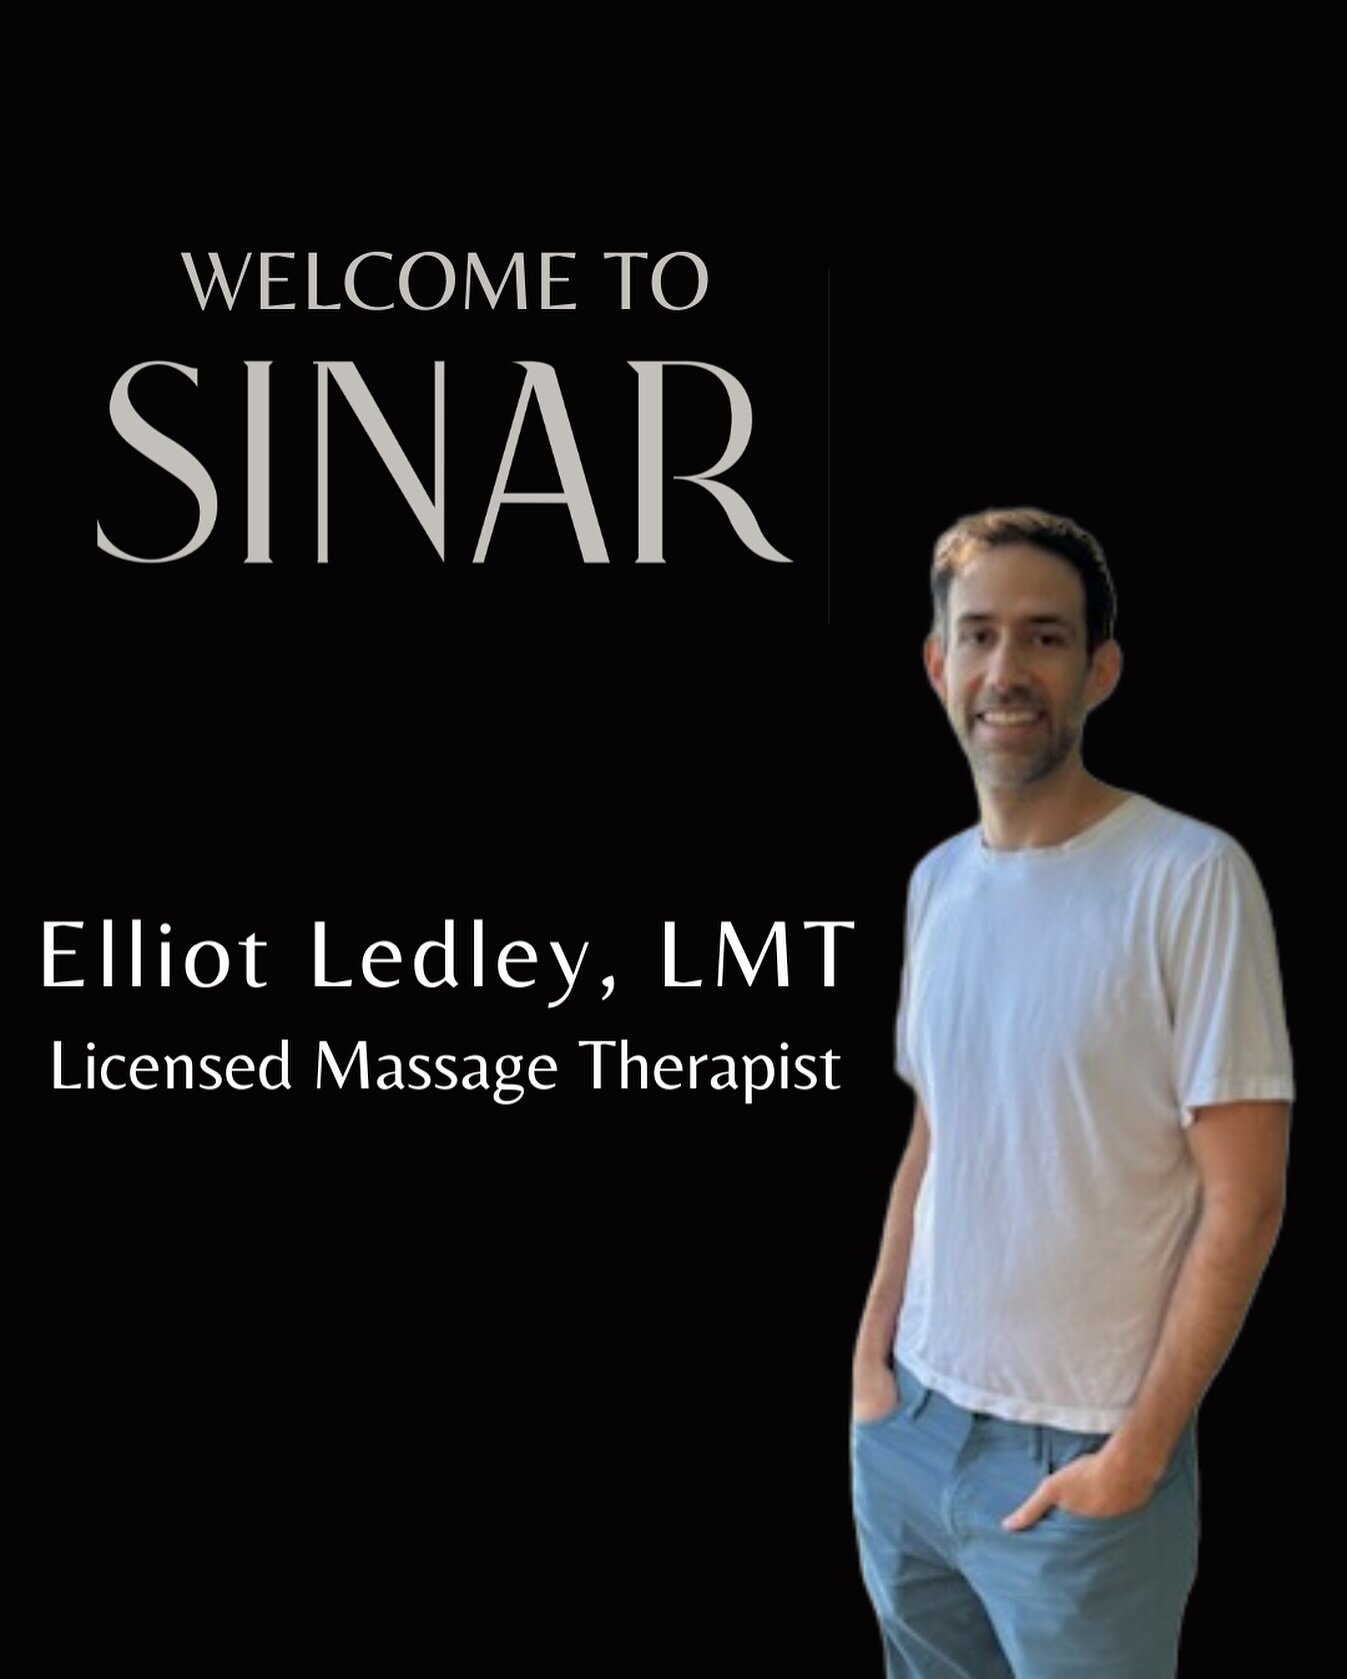 Welcoming Elliot Ledley, LMT to the team! 

Elliot is a licensed massage therapist who has a passion for the positive effects massage poses on both the body and mind. His approach to treatment is in the most attentive and caring way, ensuring a pract